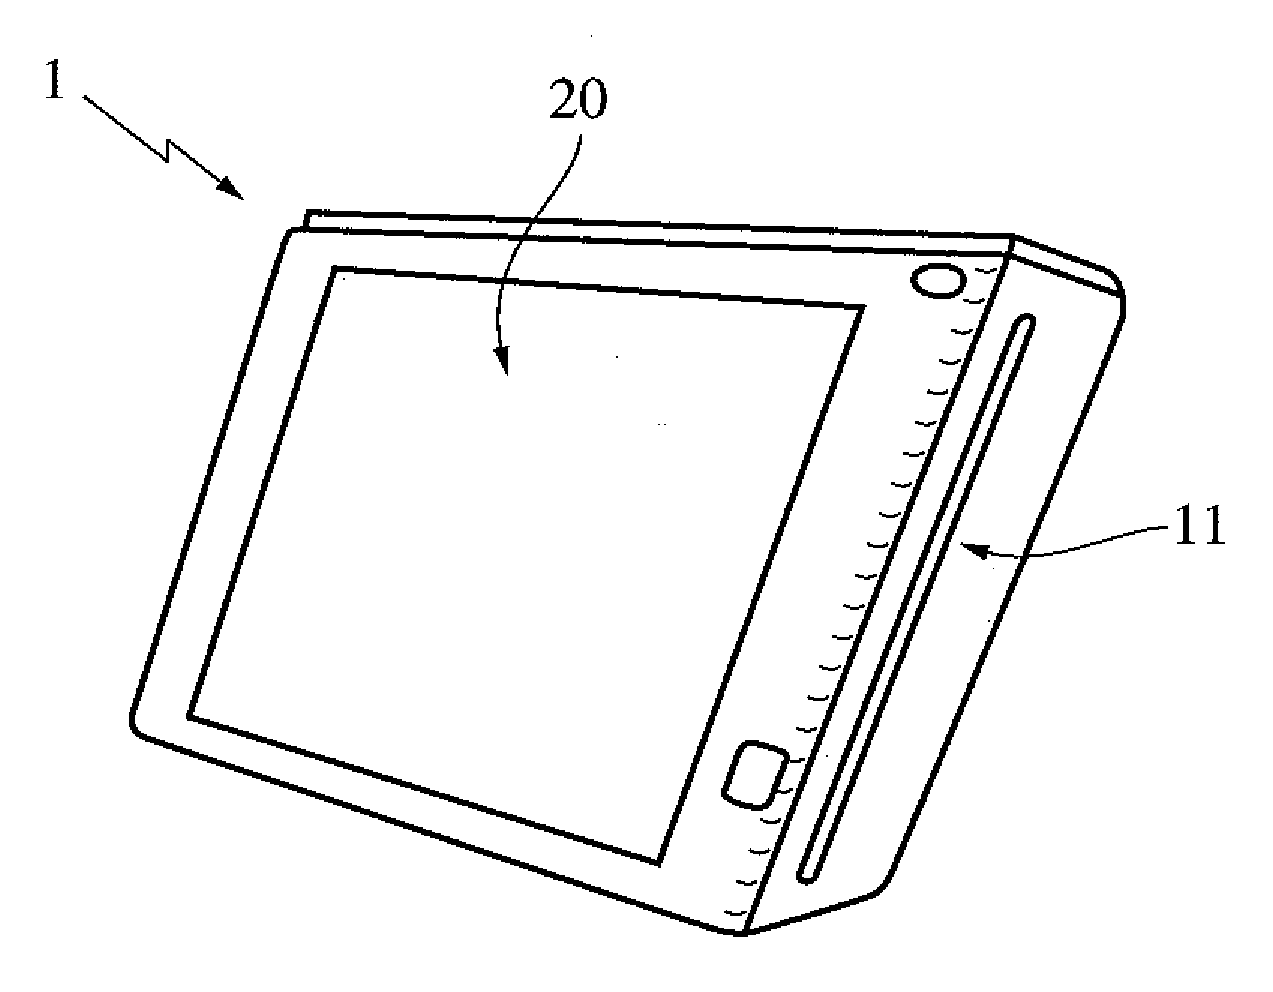 Display device and method for making same